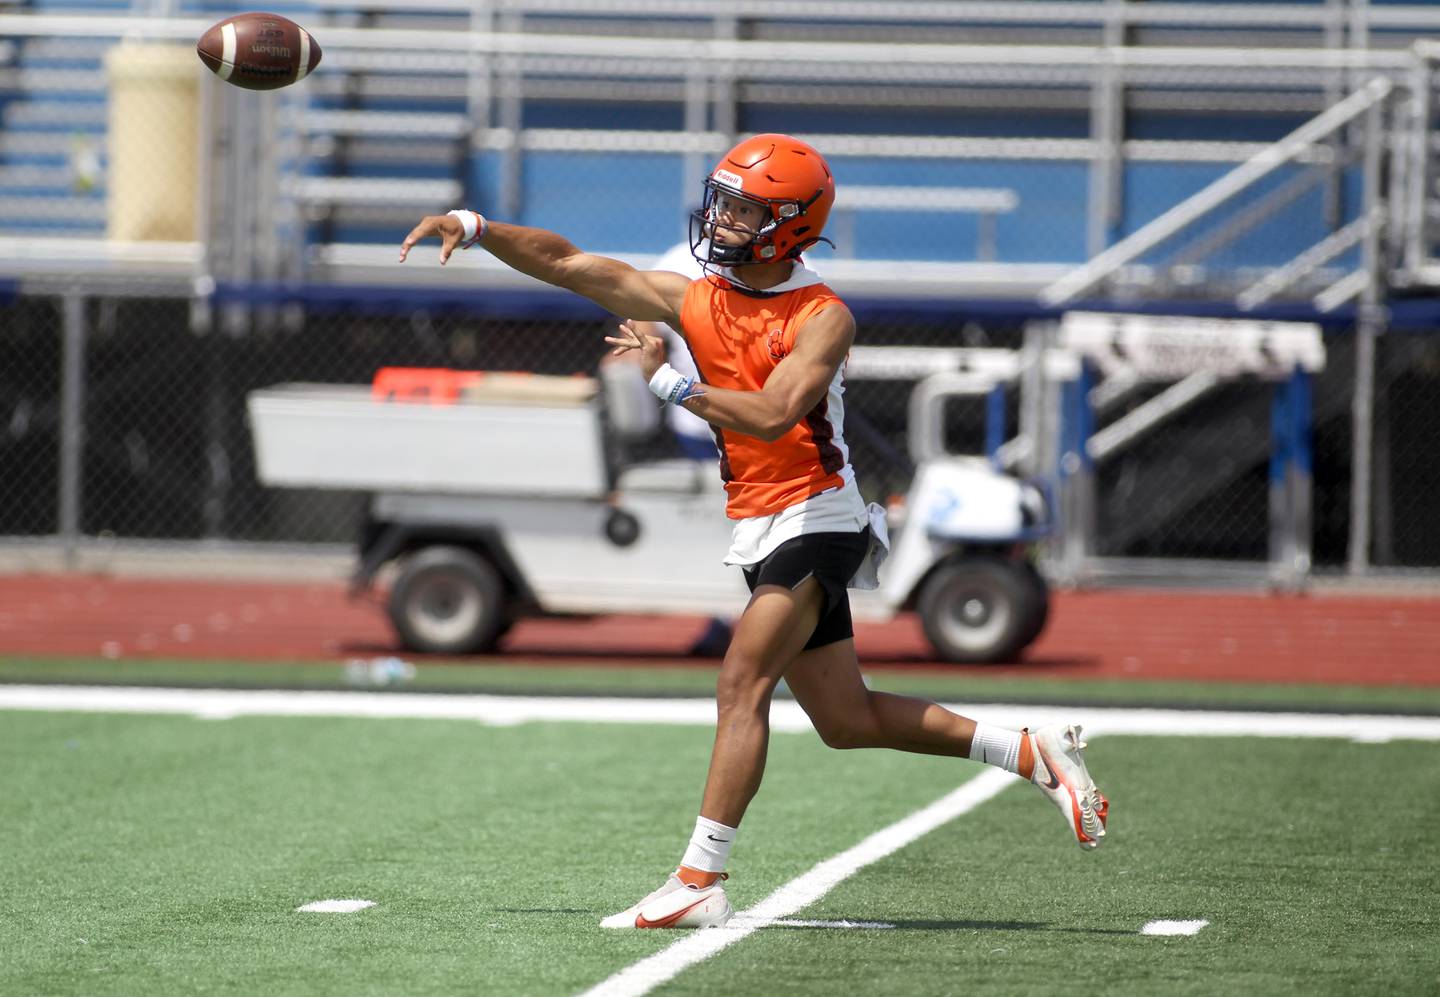 Wheaton Warrenville South quarterback James Sok passes the ball during a 7 on 7 tournament at St. Charles North High School on Thursday, June 30, 2022.